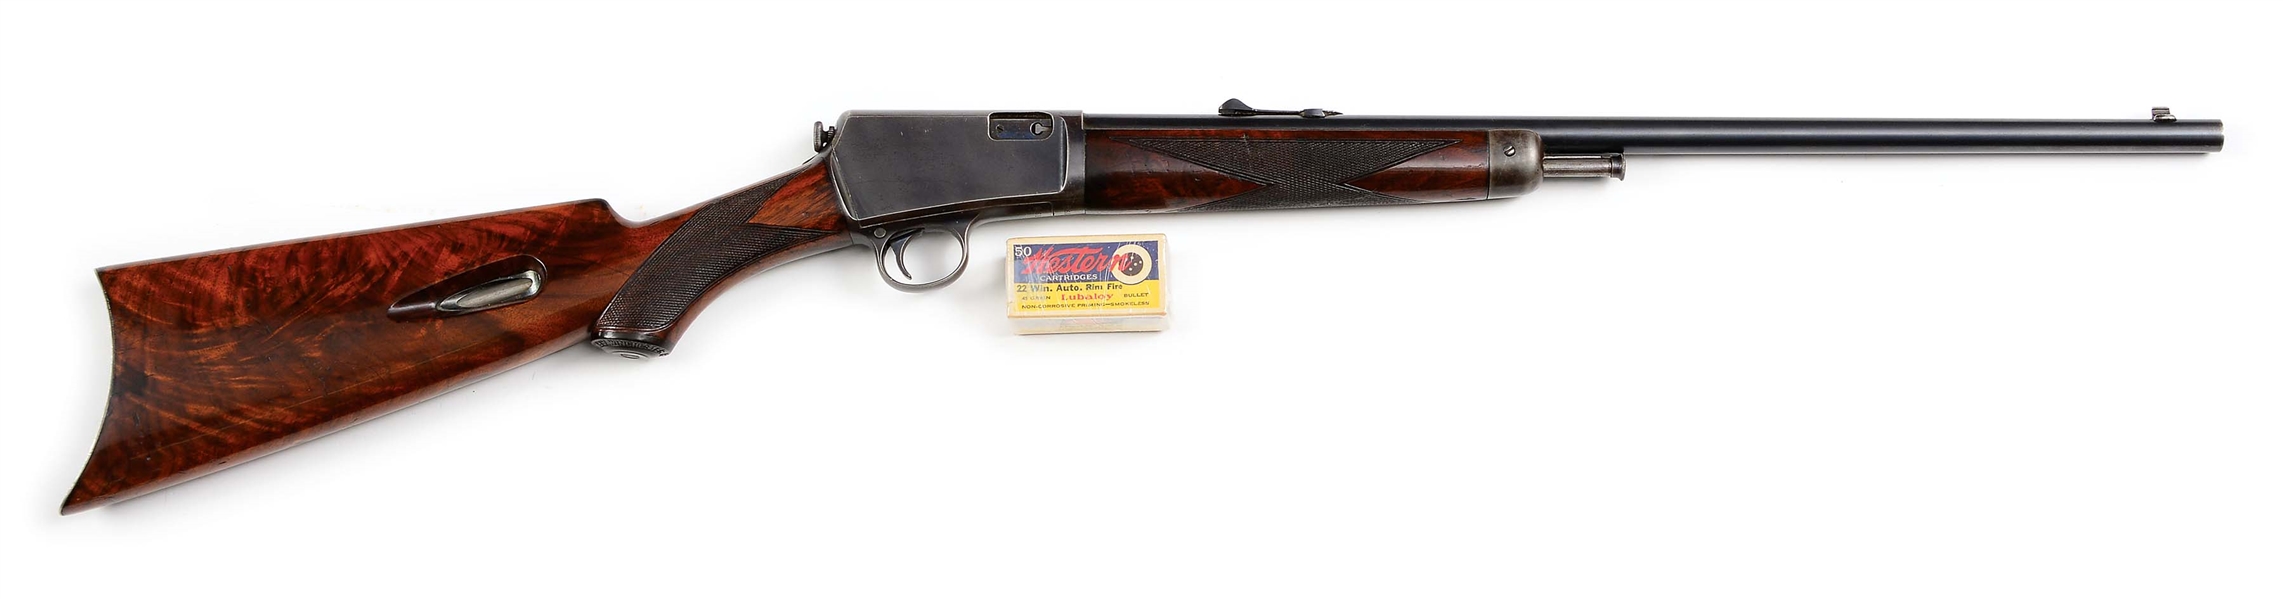 (C) DELUXE WINCHESTER MODEL 1903 SEMI-AUTOMATIC RIFLE WITH AMMUNITION (1910).